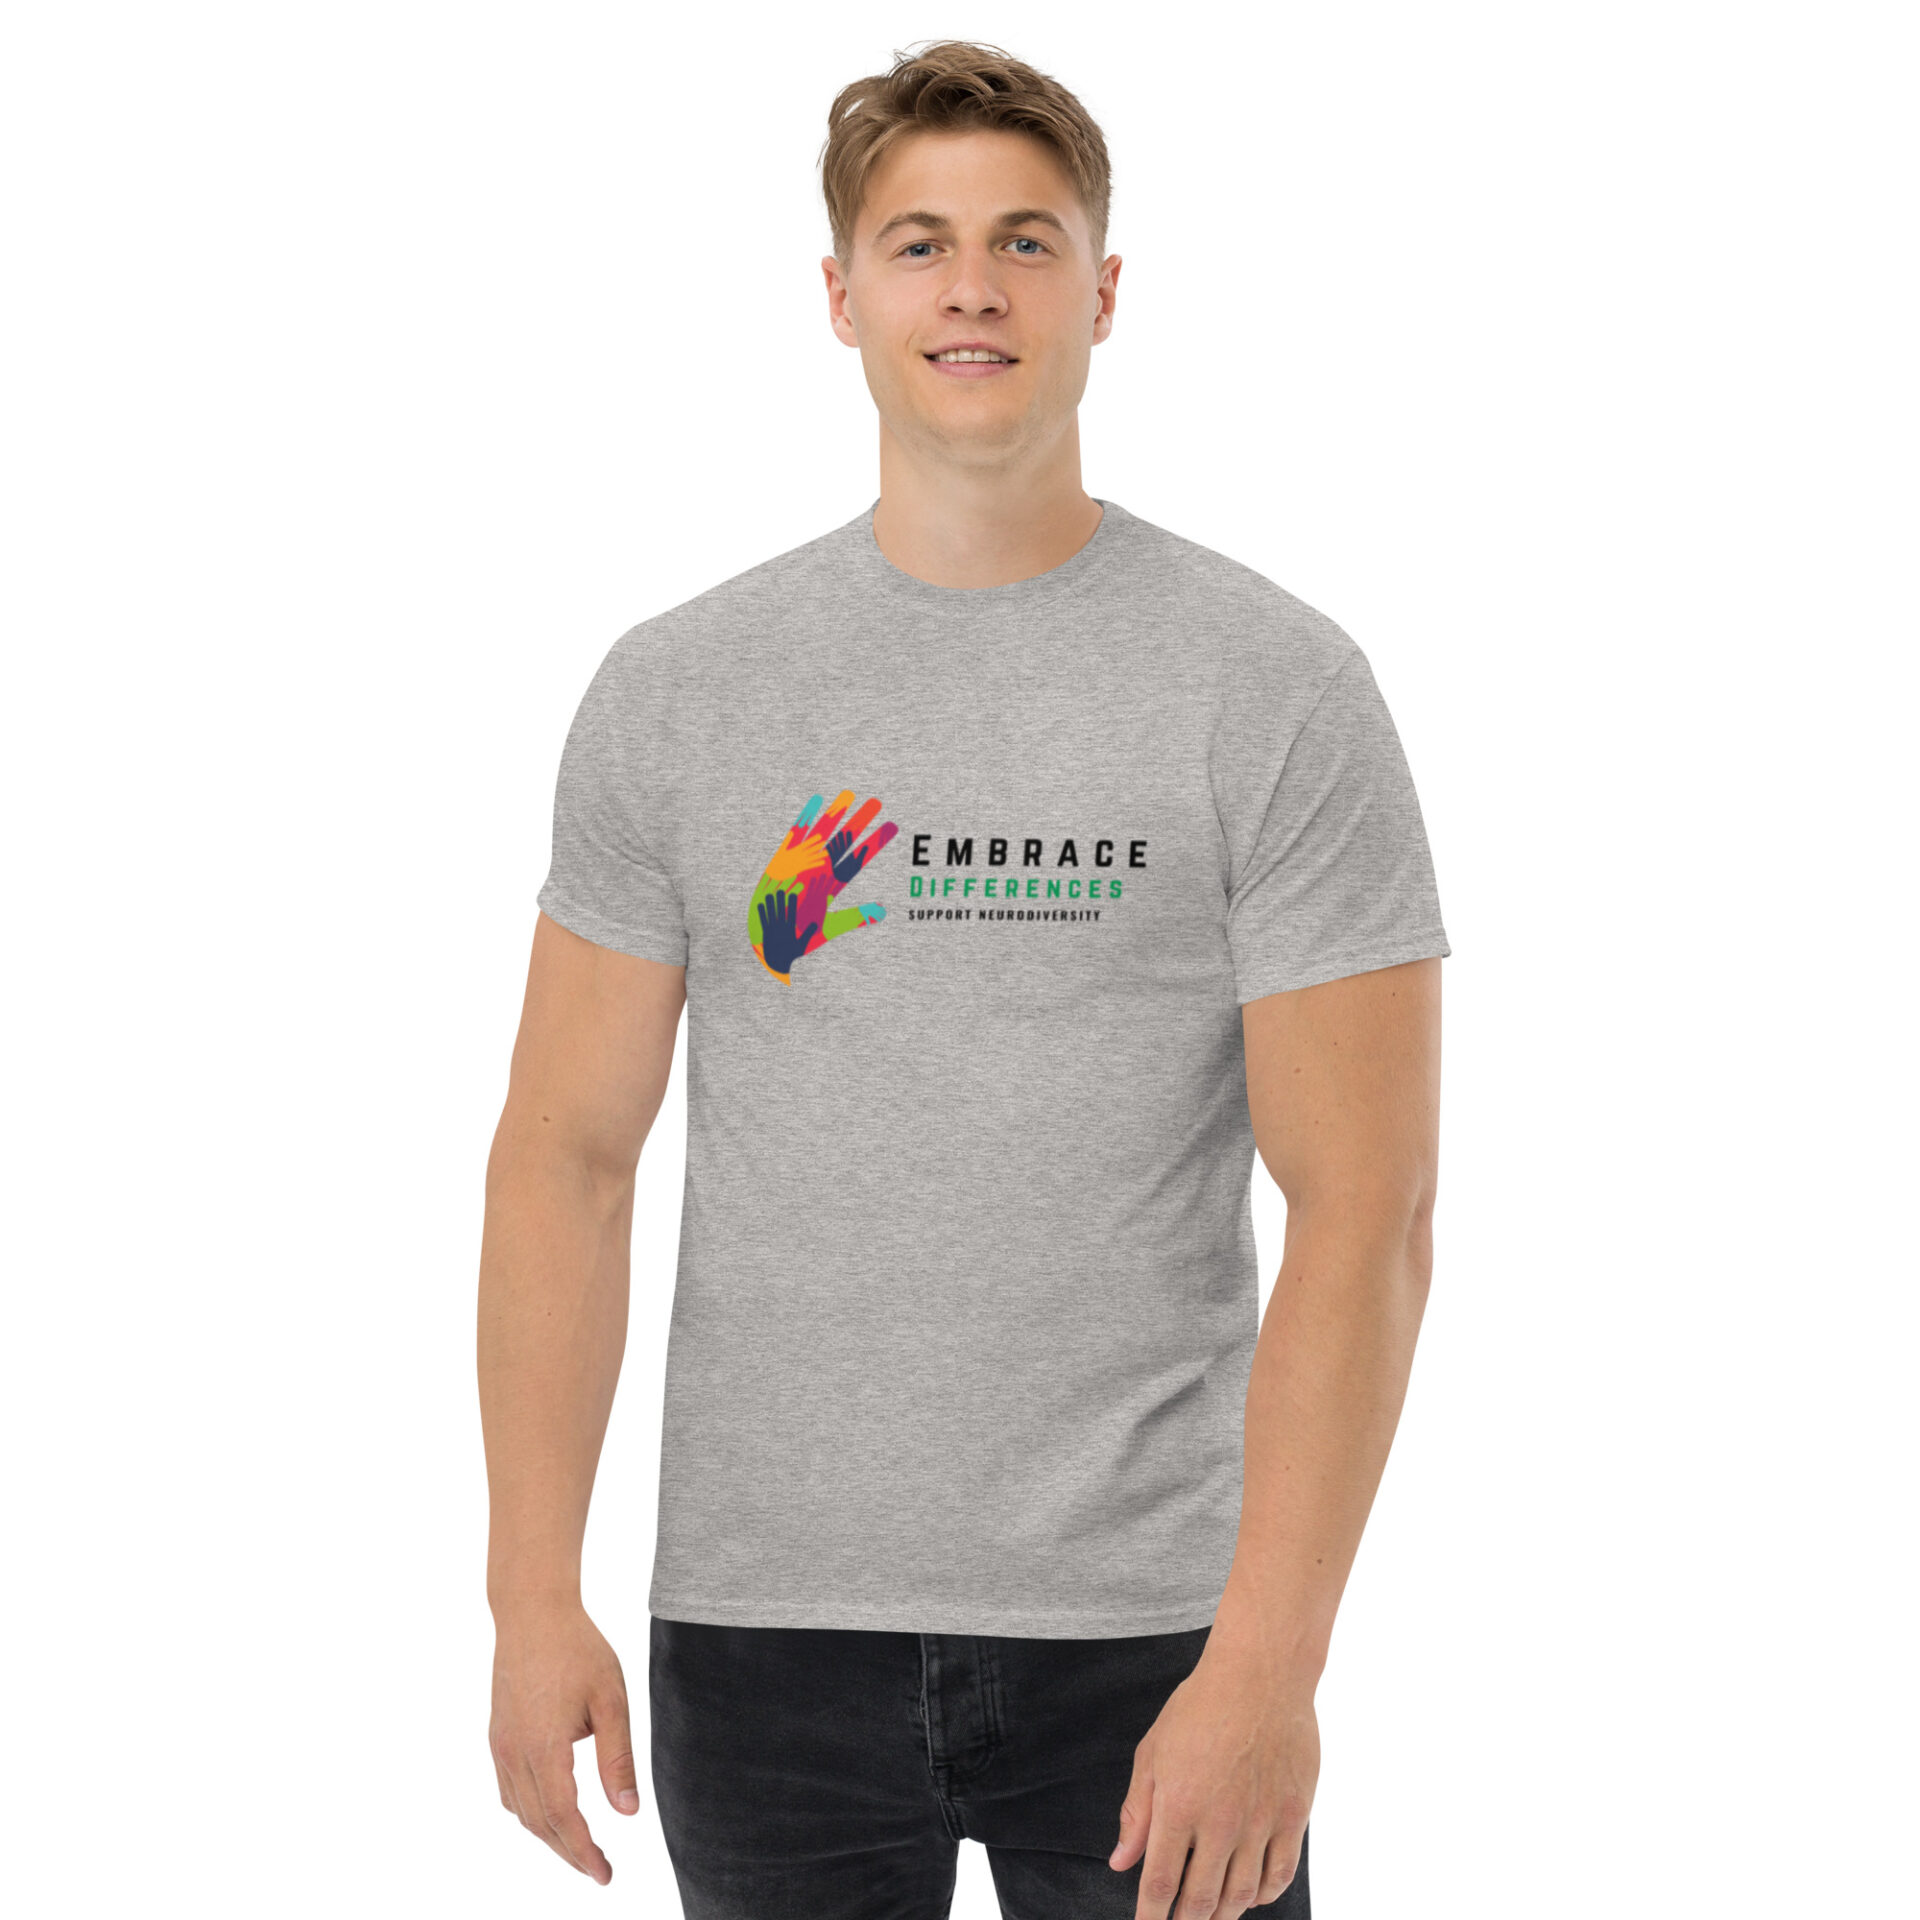 Embrace Differences – Support Neurodiversity Men’s Classic Tee